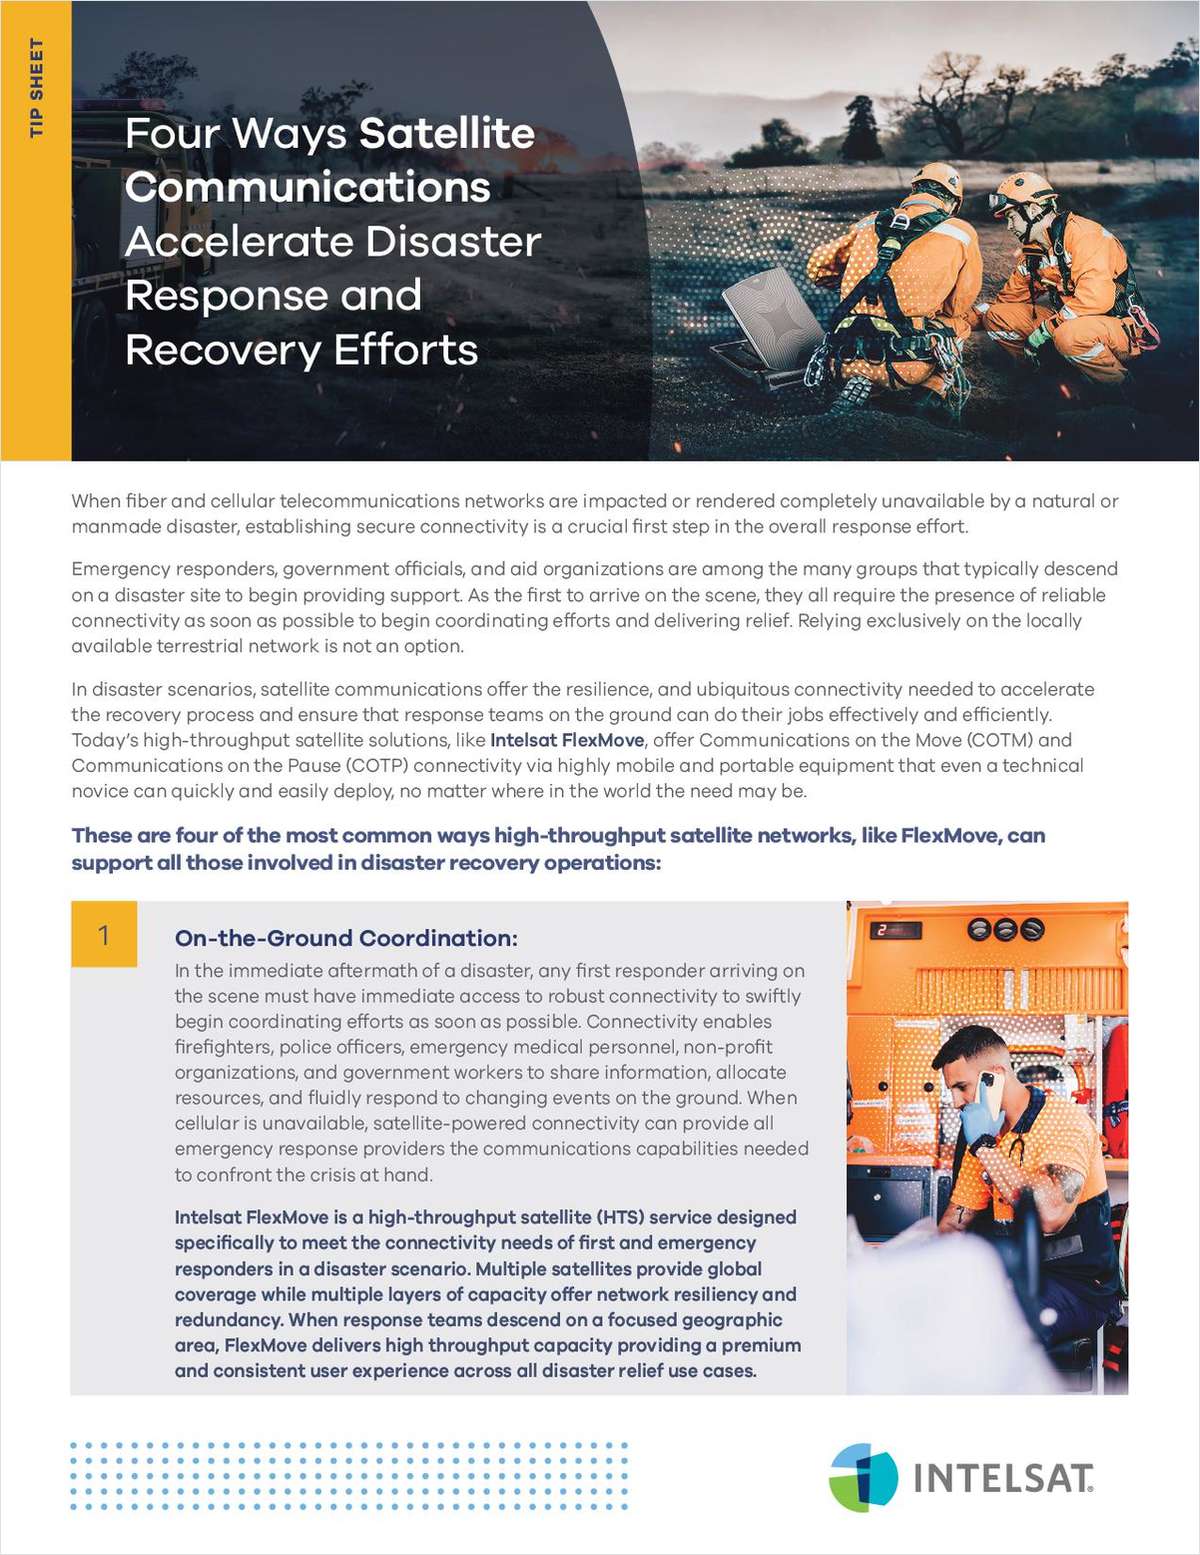 Four Ways Satellite Communications Accelerate Disaster Response and Recovery Efforts